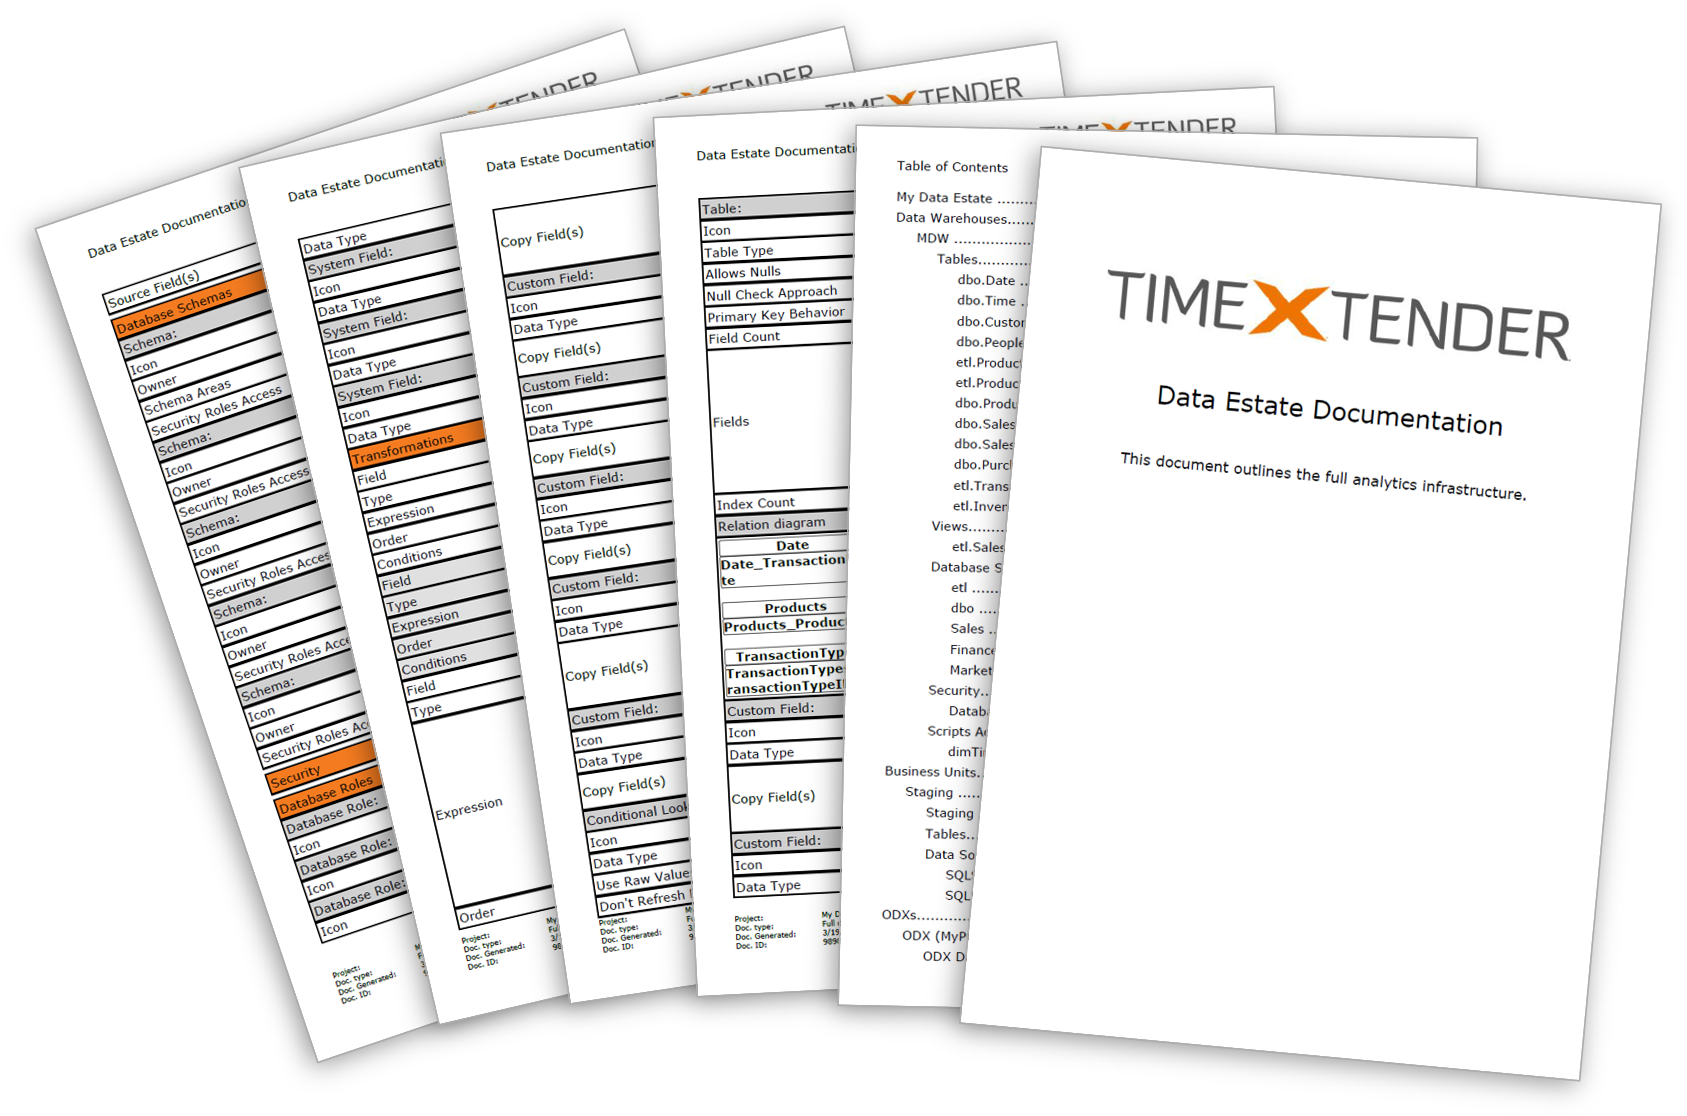 Time to stop writing documentation. TimeXtender automatically generates all the documentation you need.